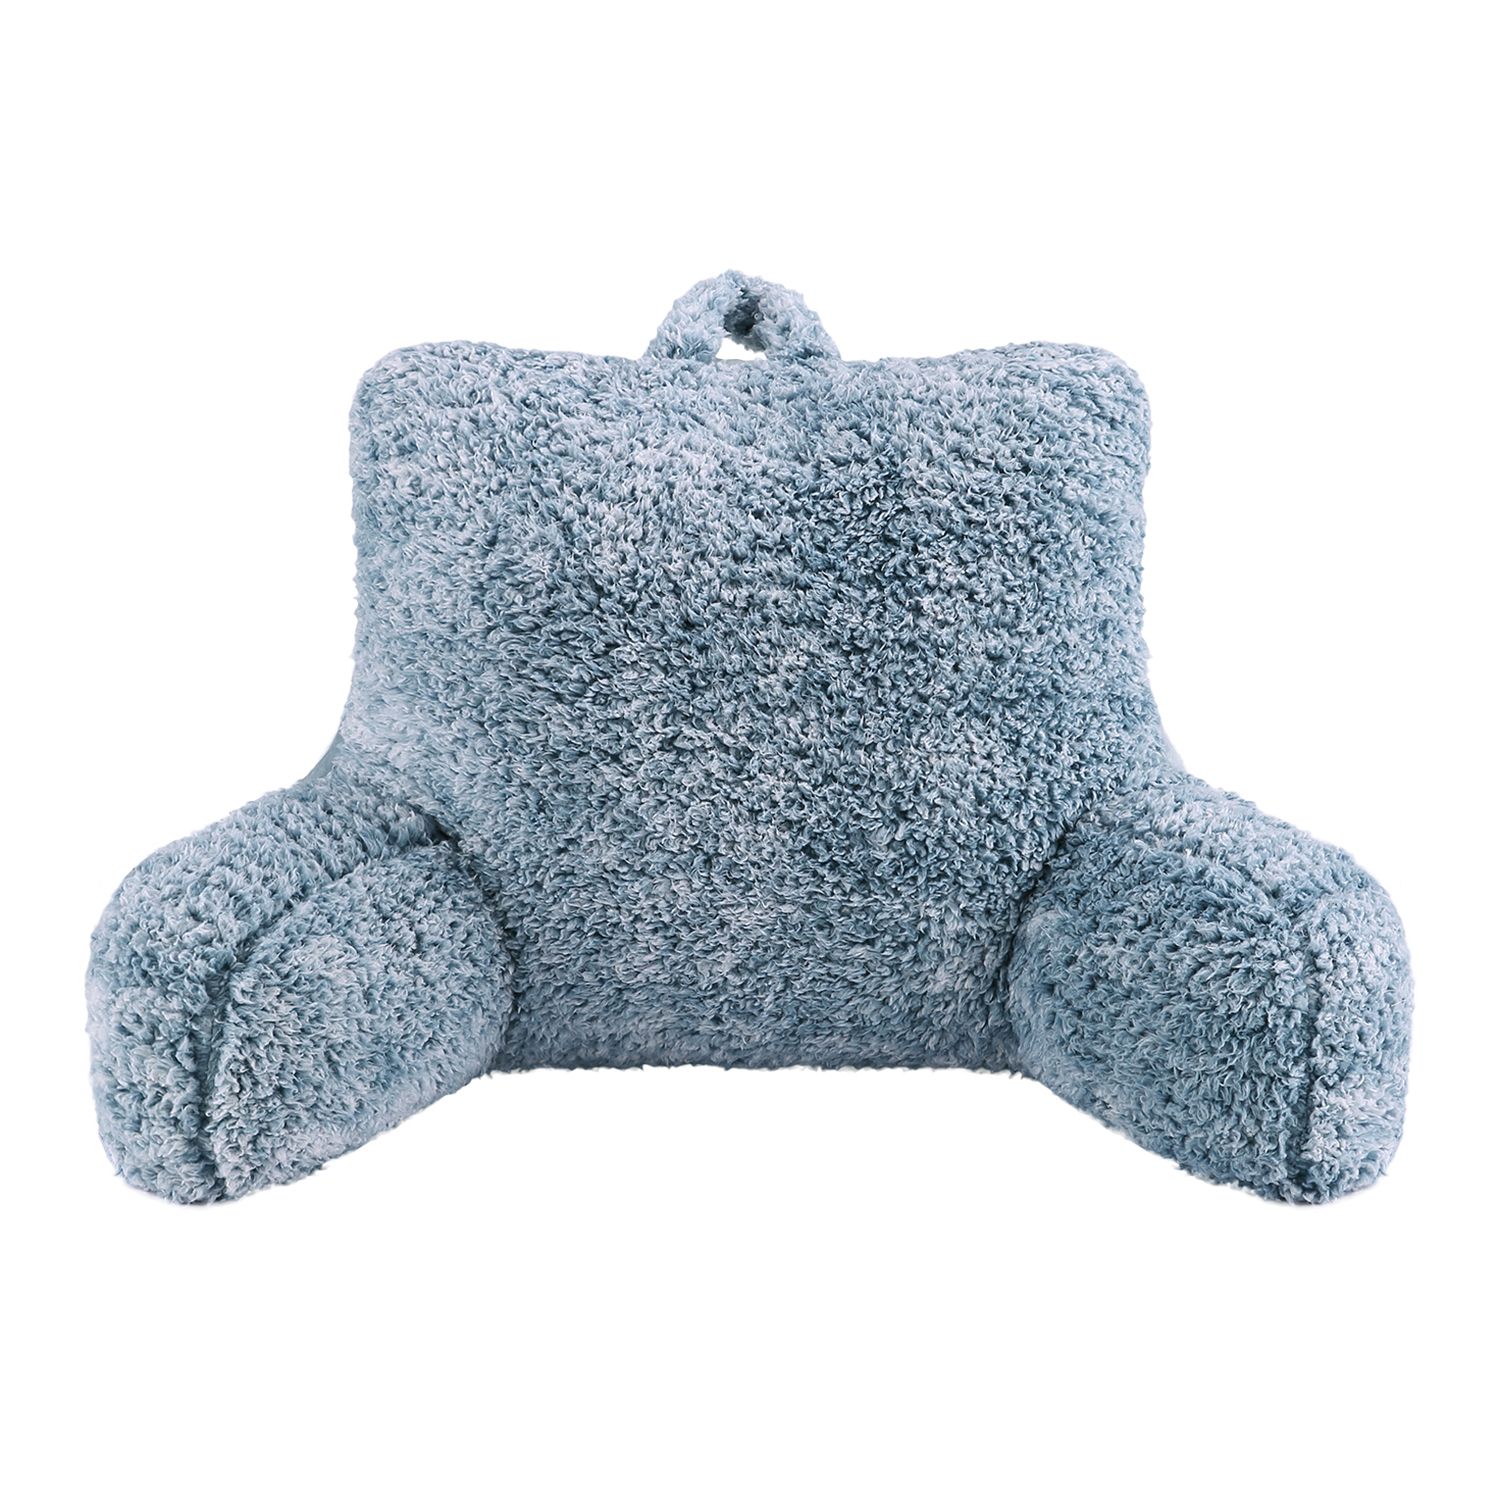 The Big One® Sherpa Bed Rest Pillow